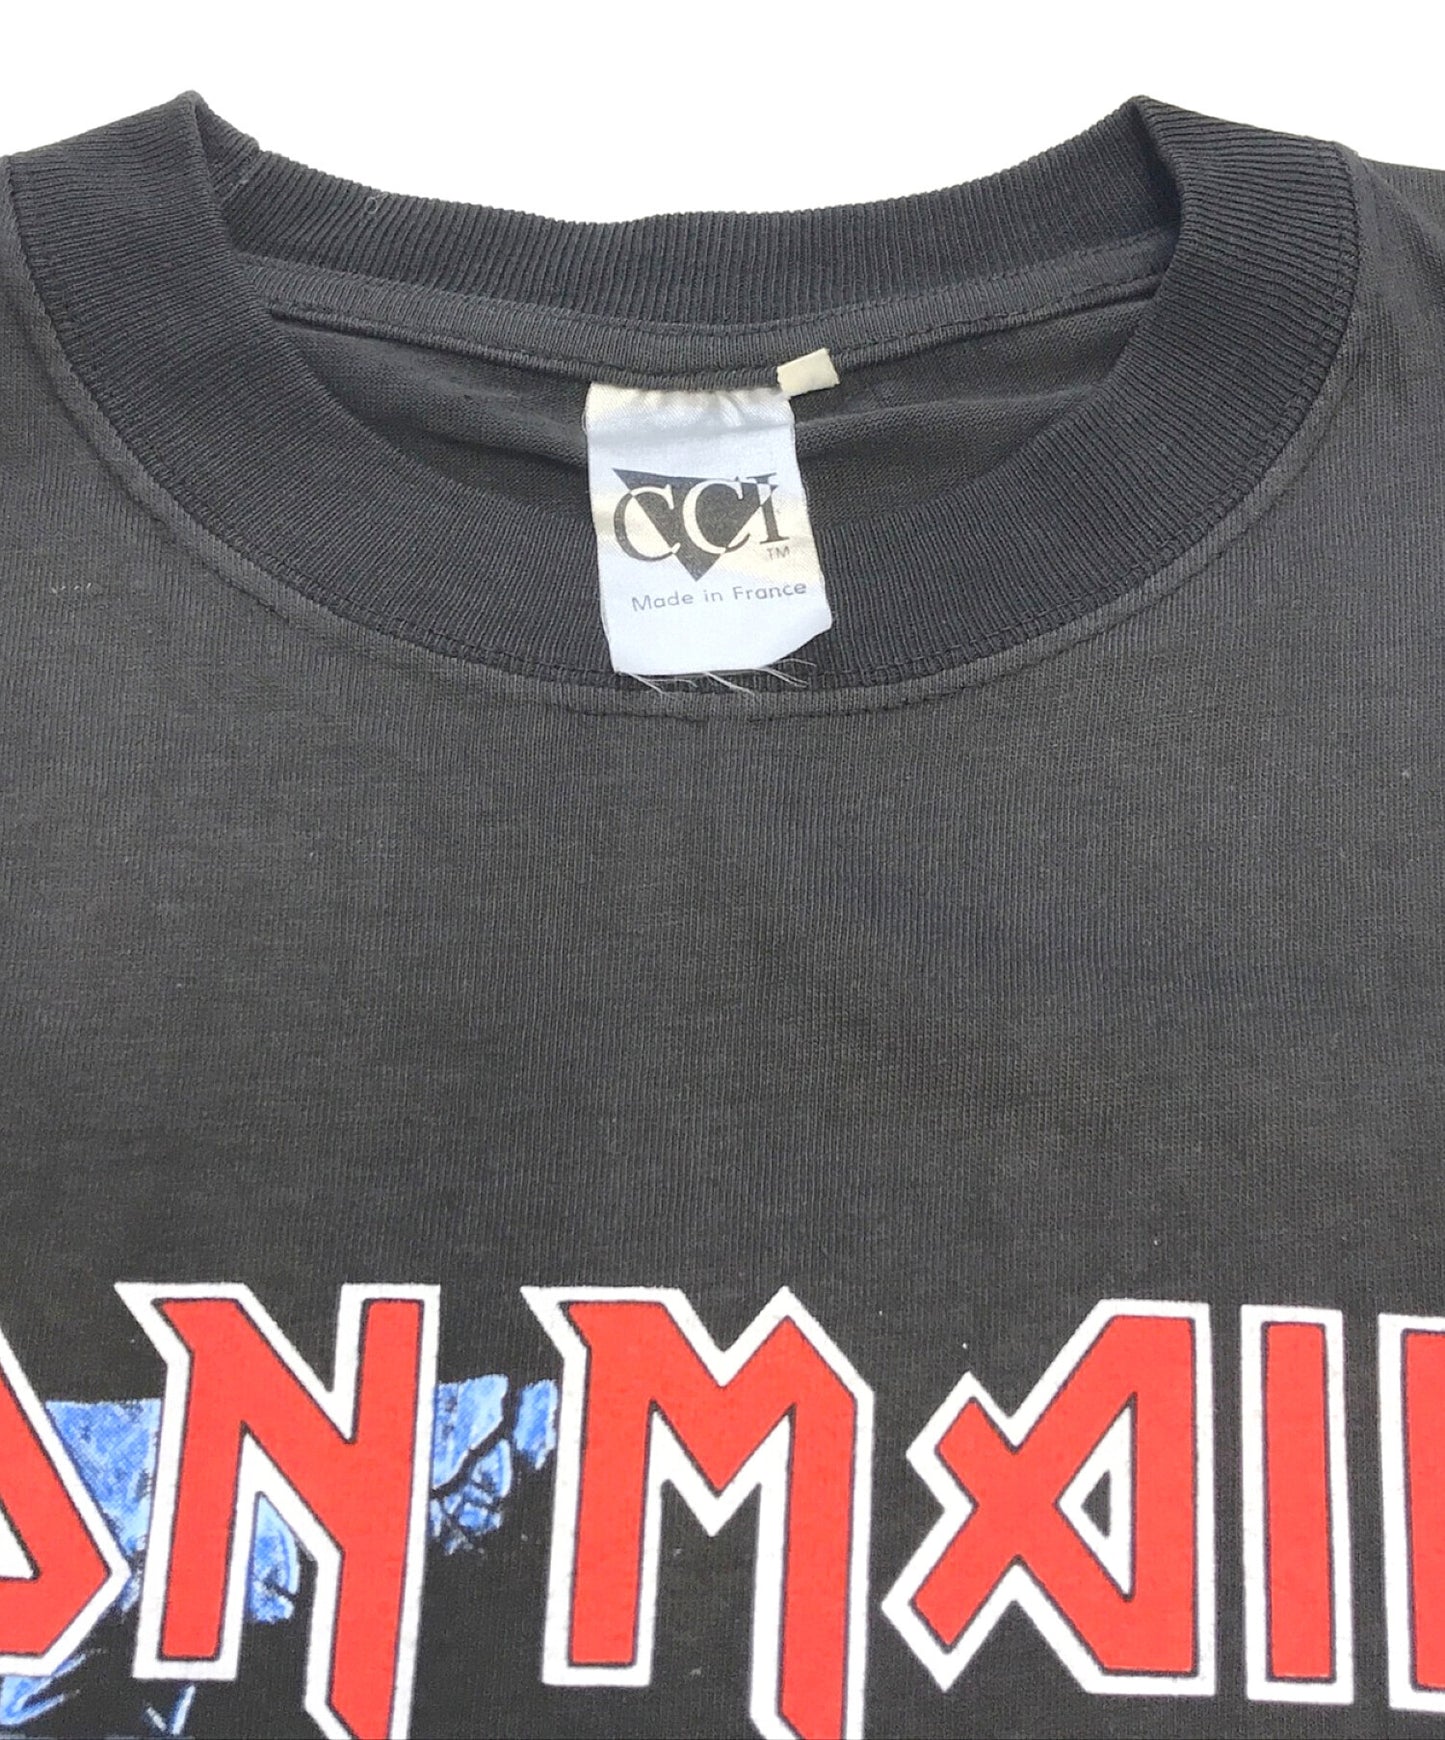 [Pre-owned] IRON MAIDEN Band T-Shirt